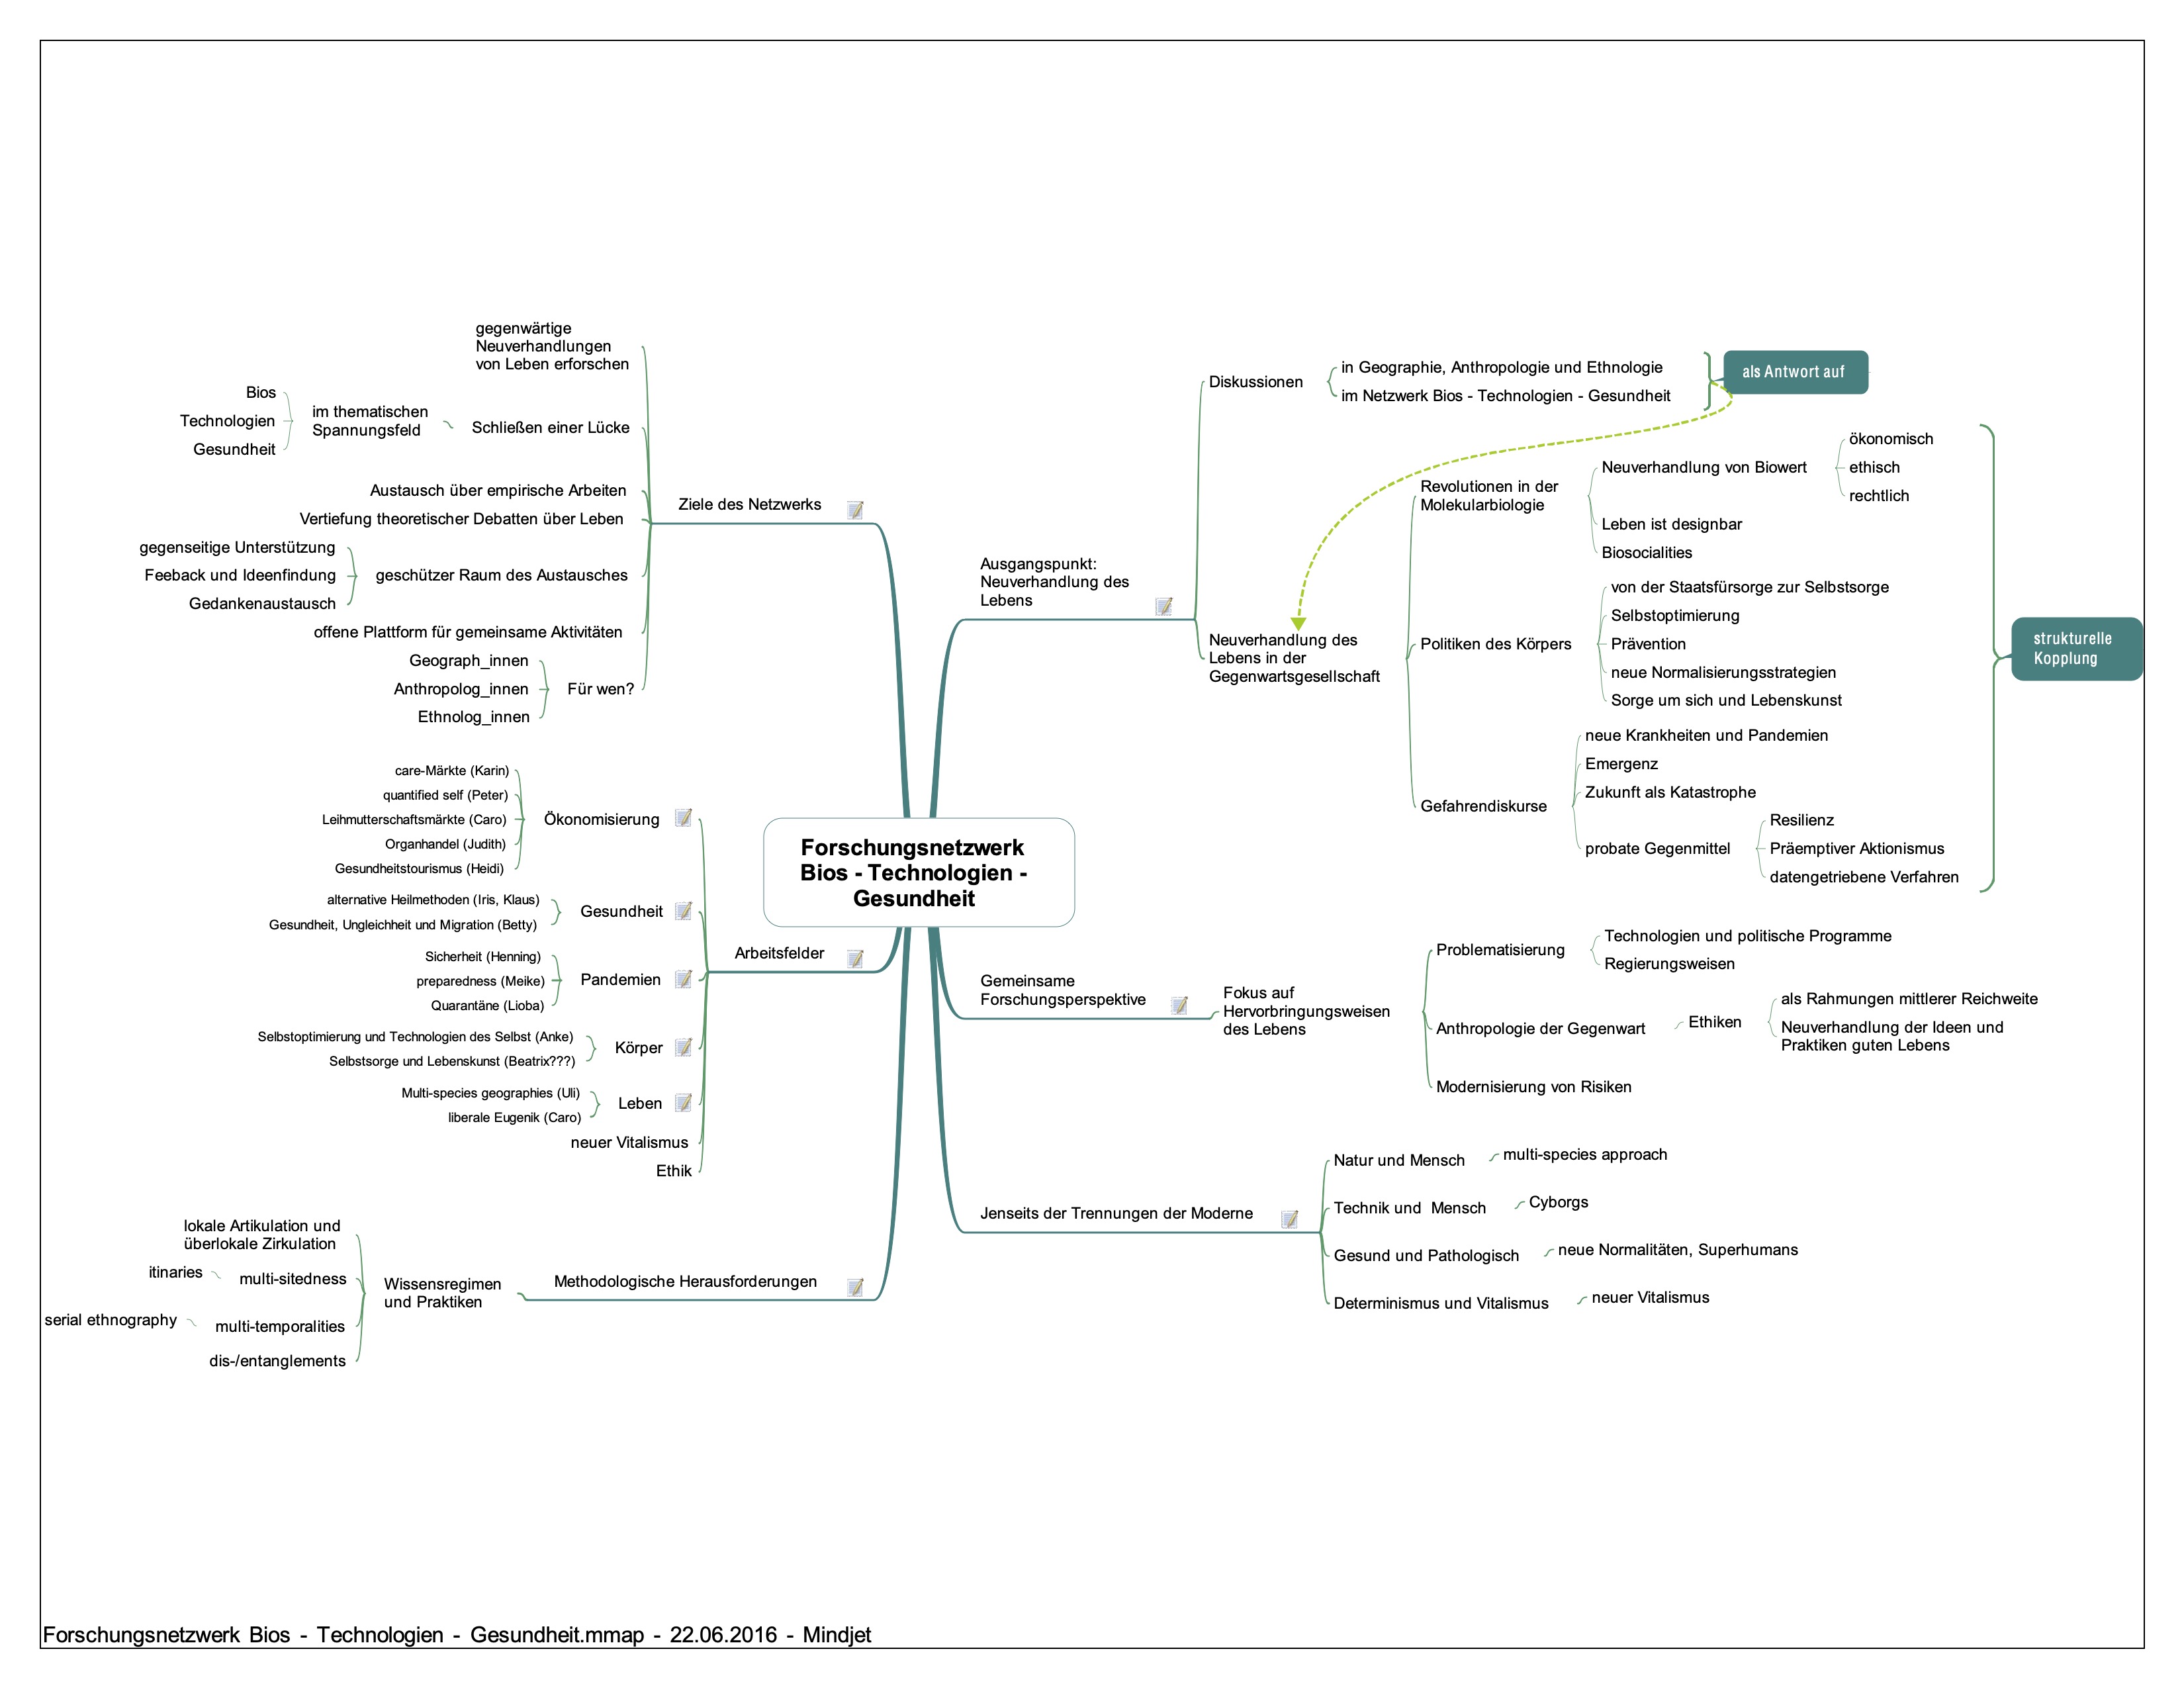 Mindmap thematic focus of the network